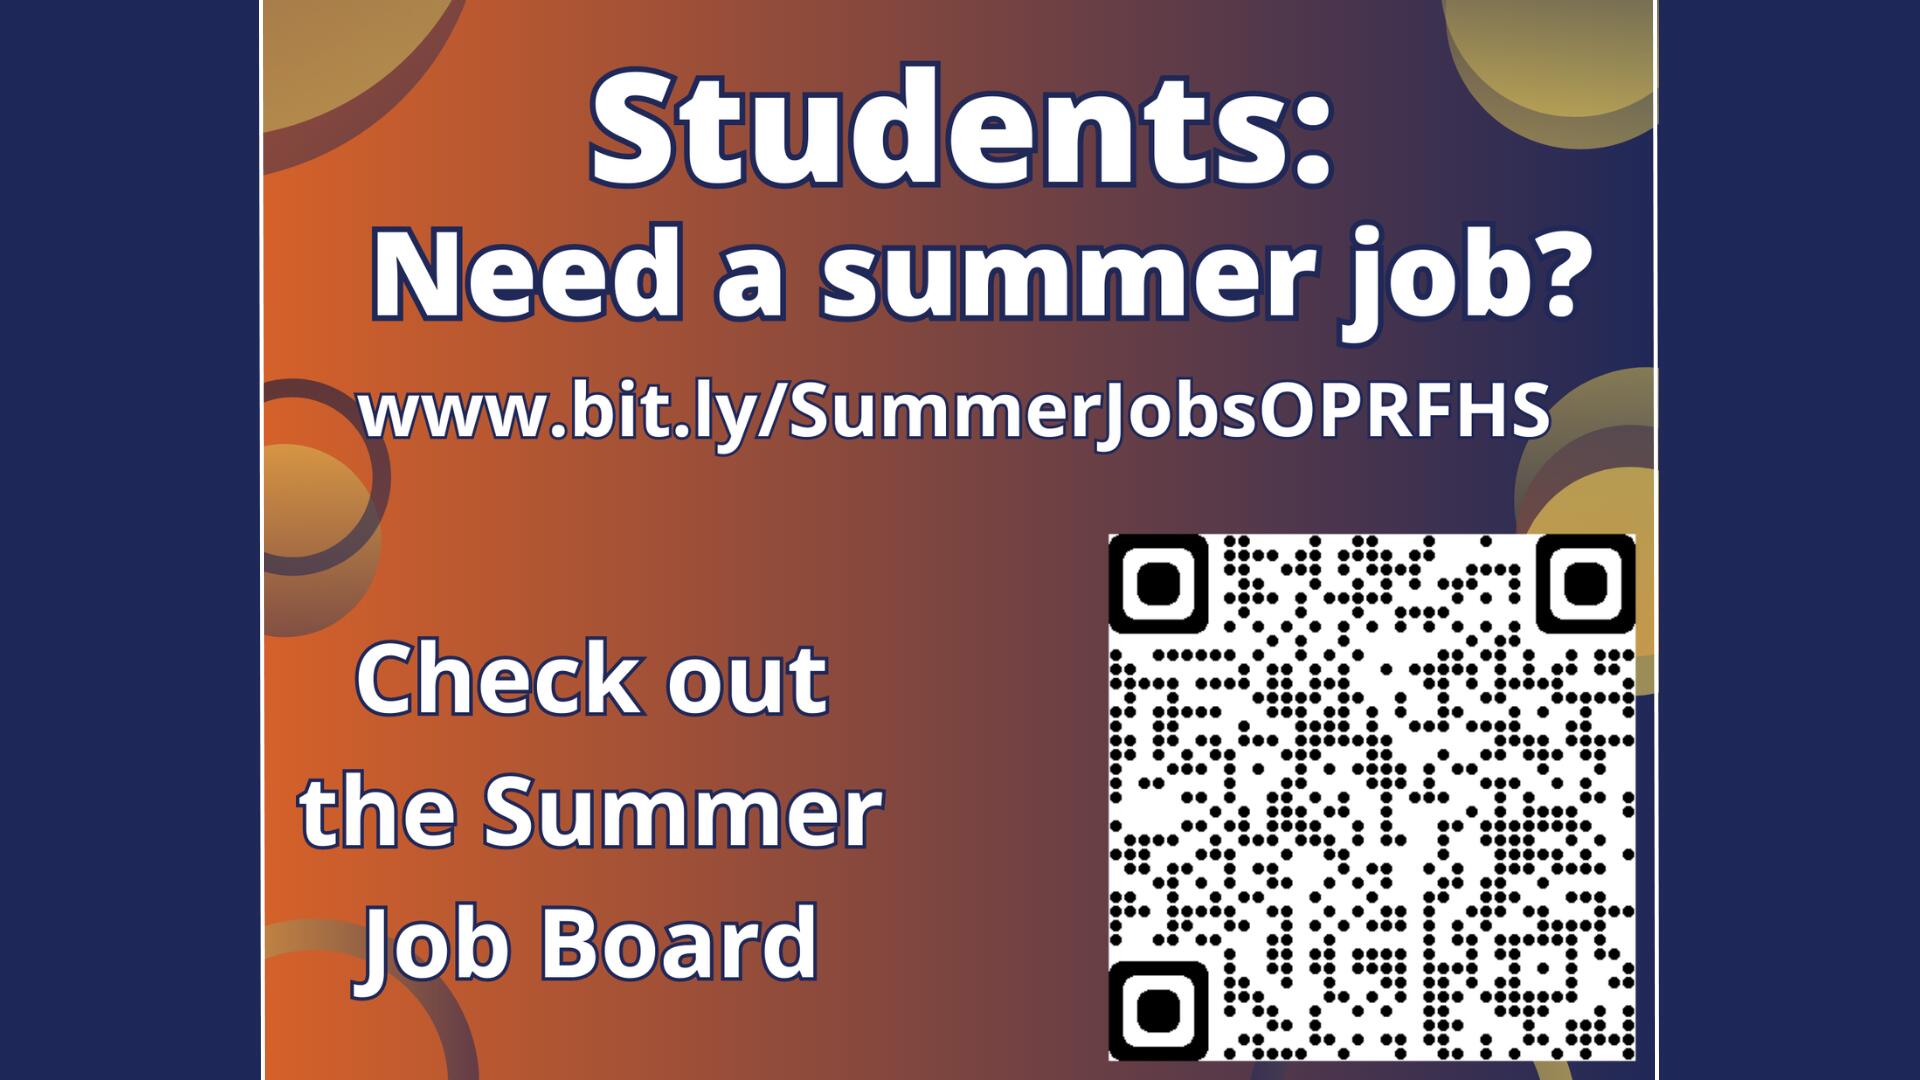 Summer job opportunities for students